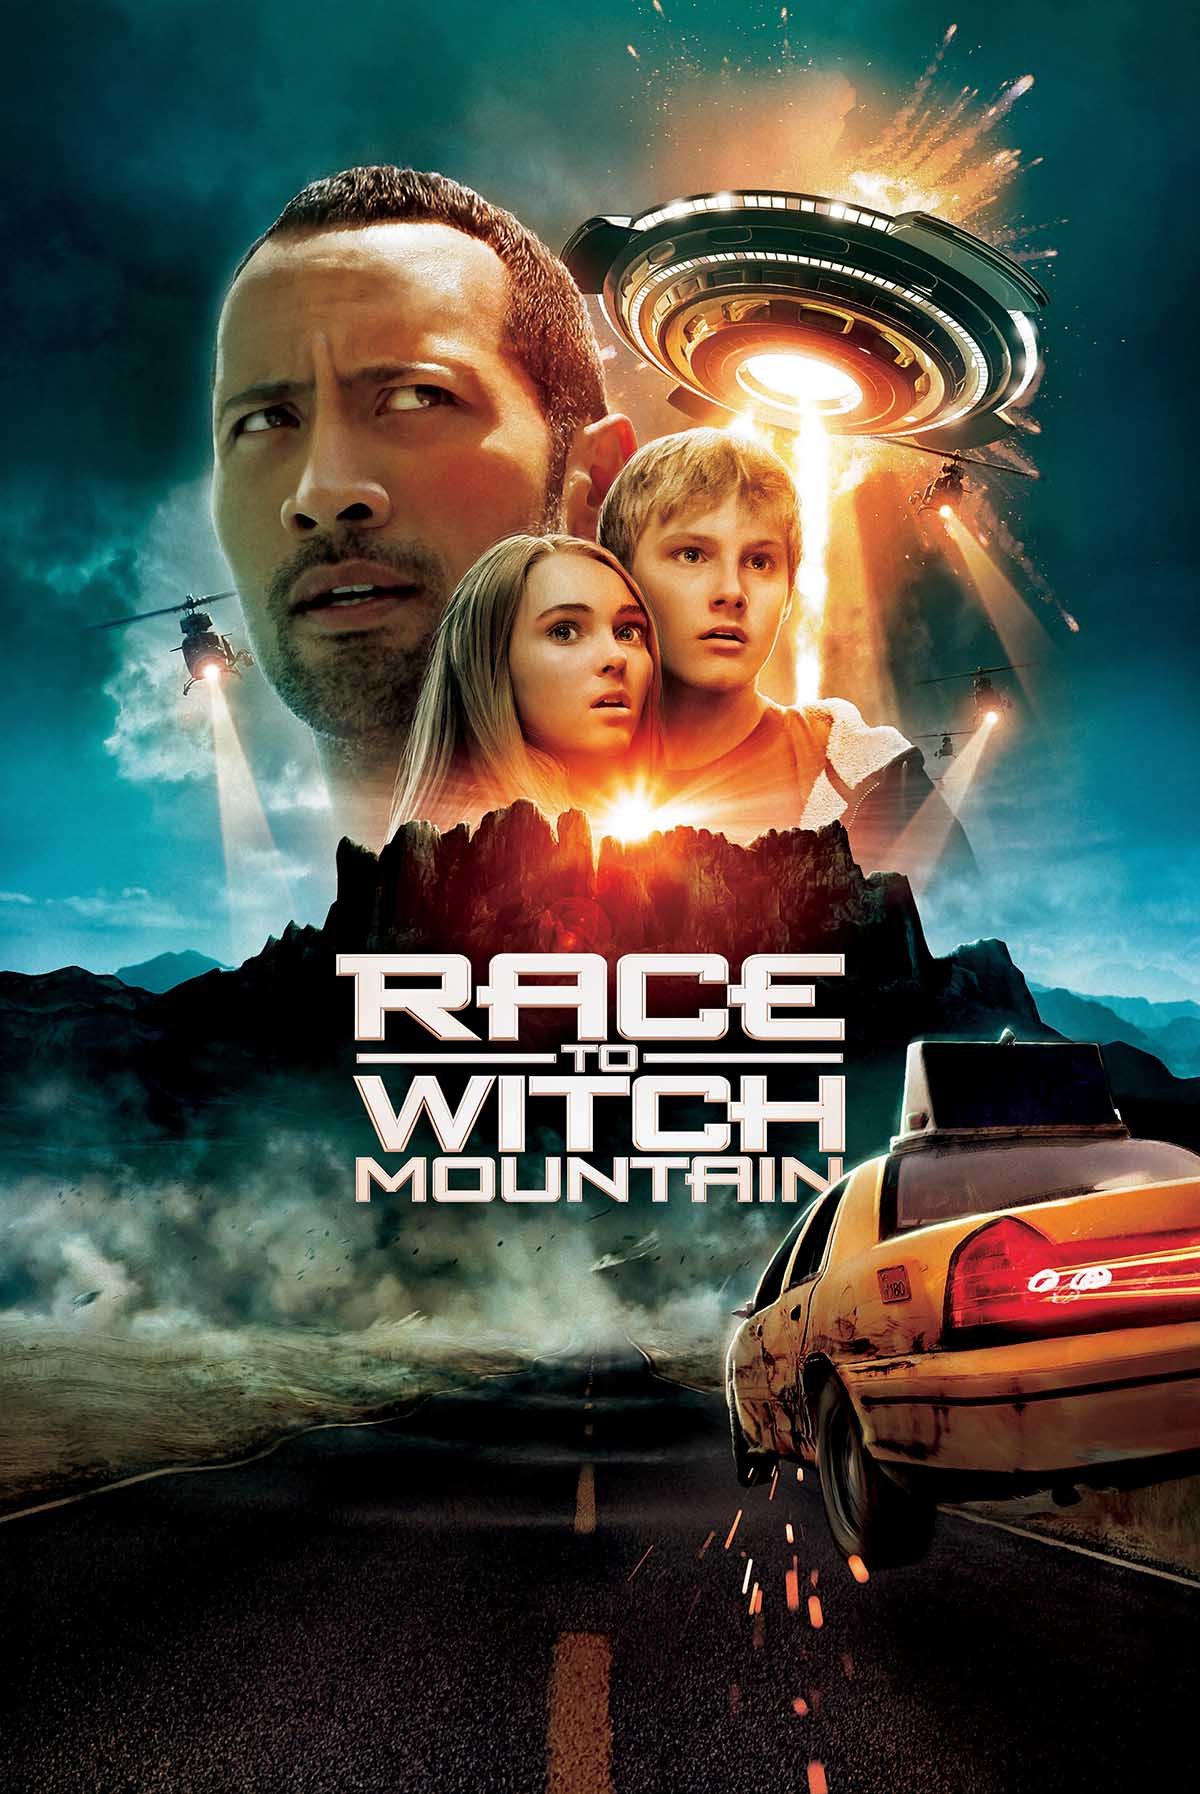 Now Player Race To Witch Mountain